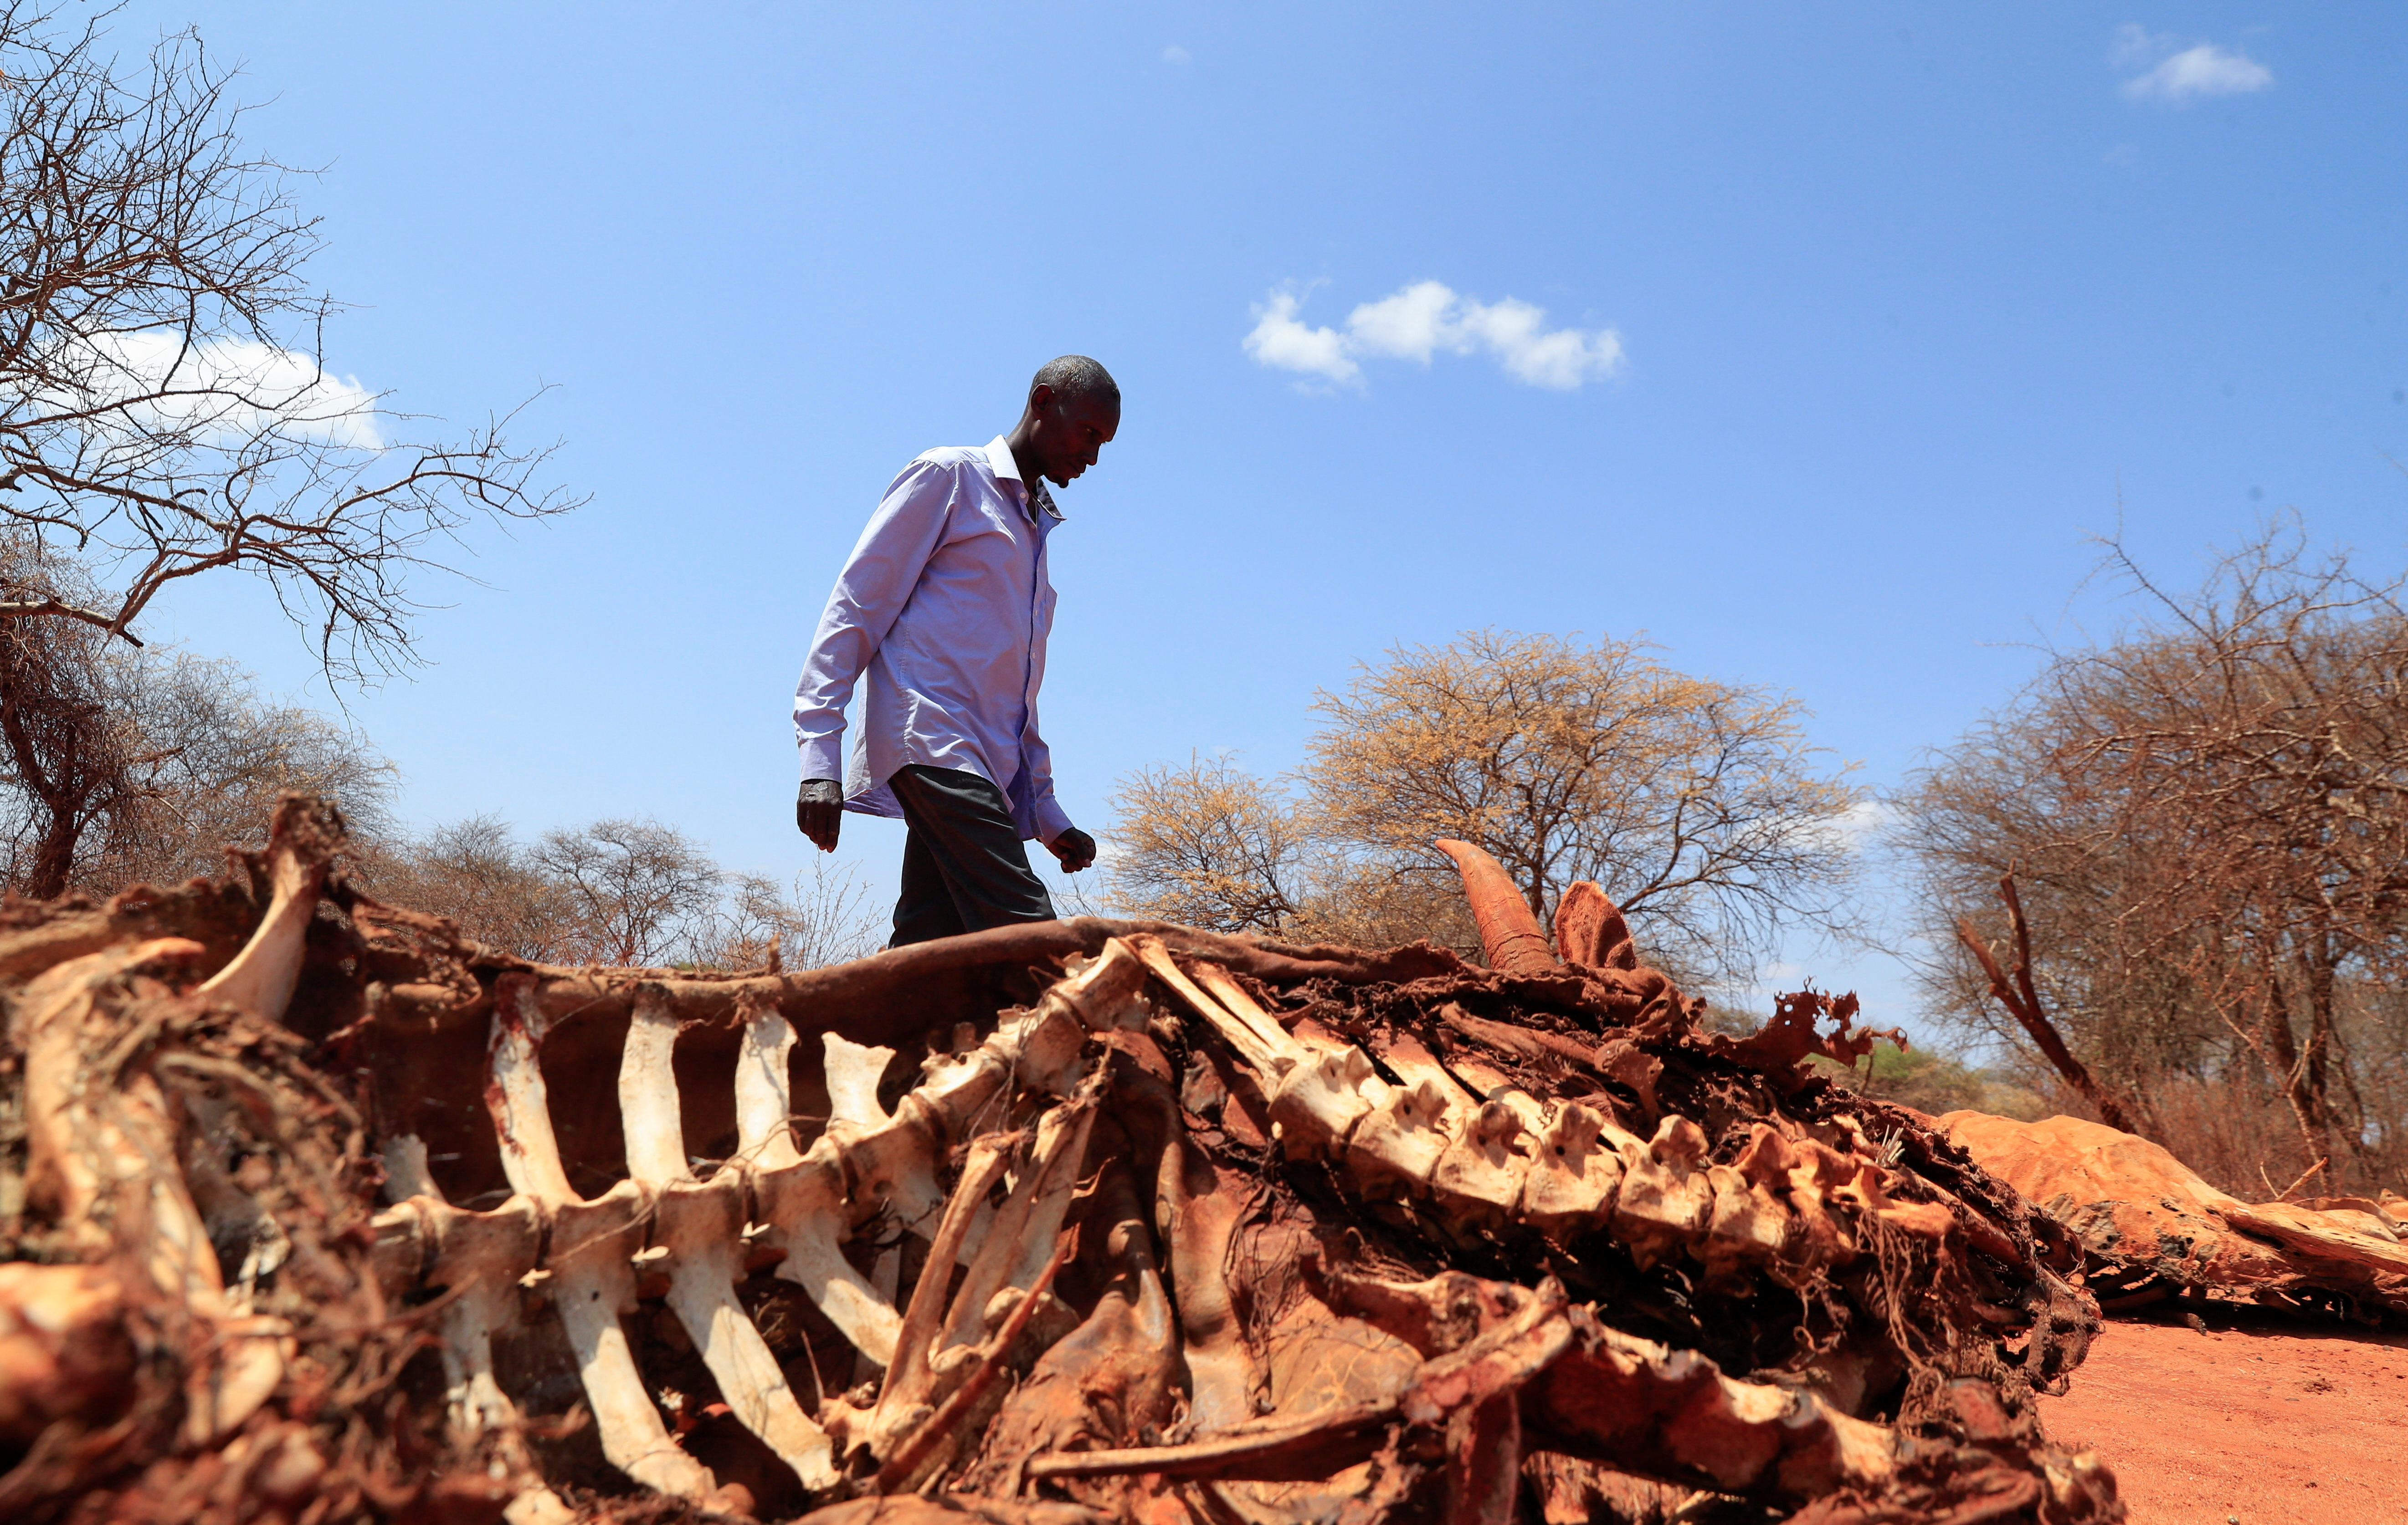 56-years-old pastoralist Ali Hacho Ali walks past the carcass of his dead cow following a prolonged drought in Eresteno